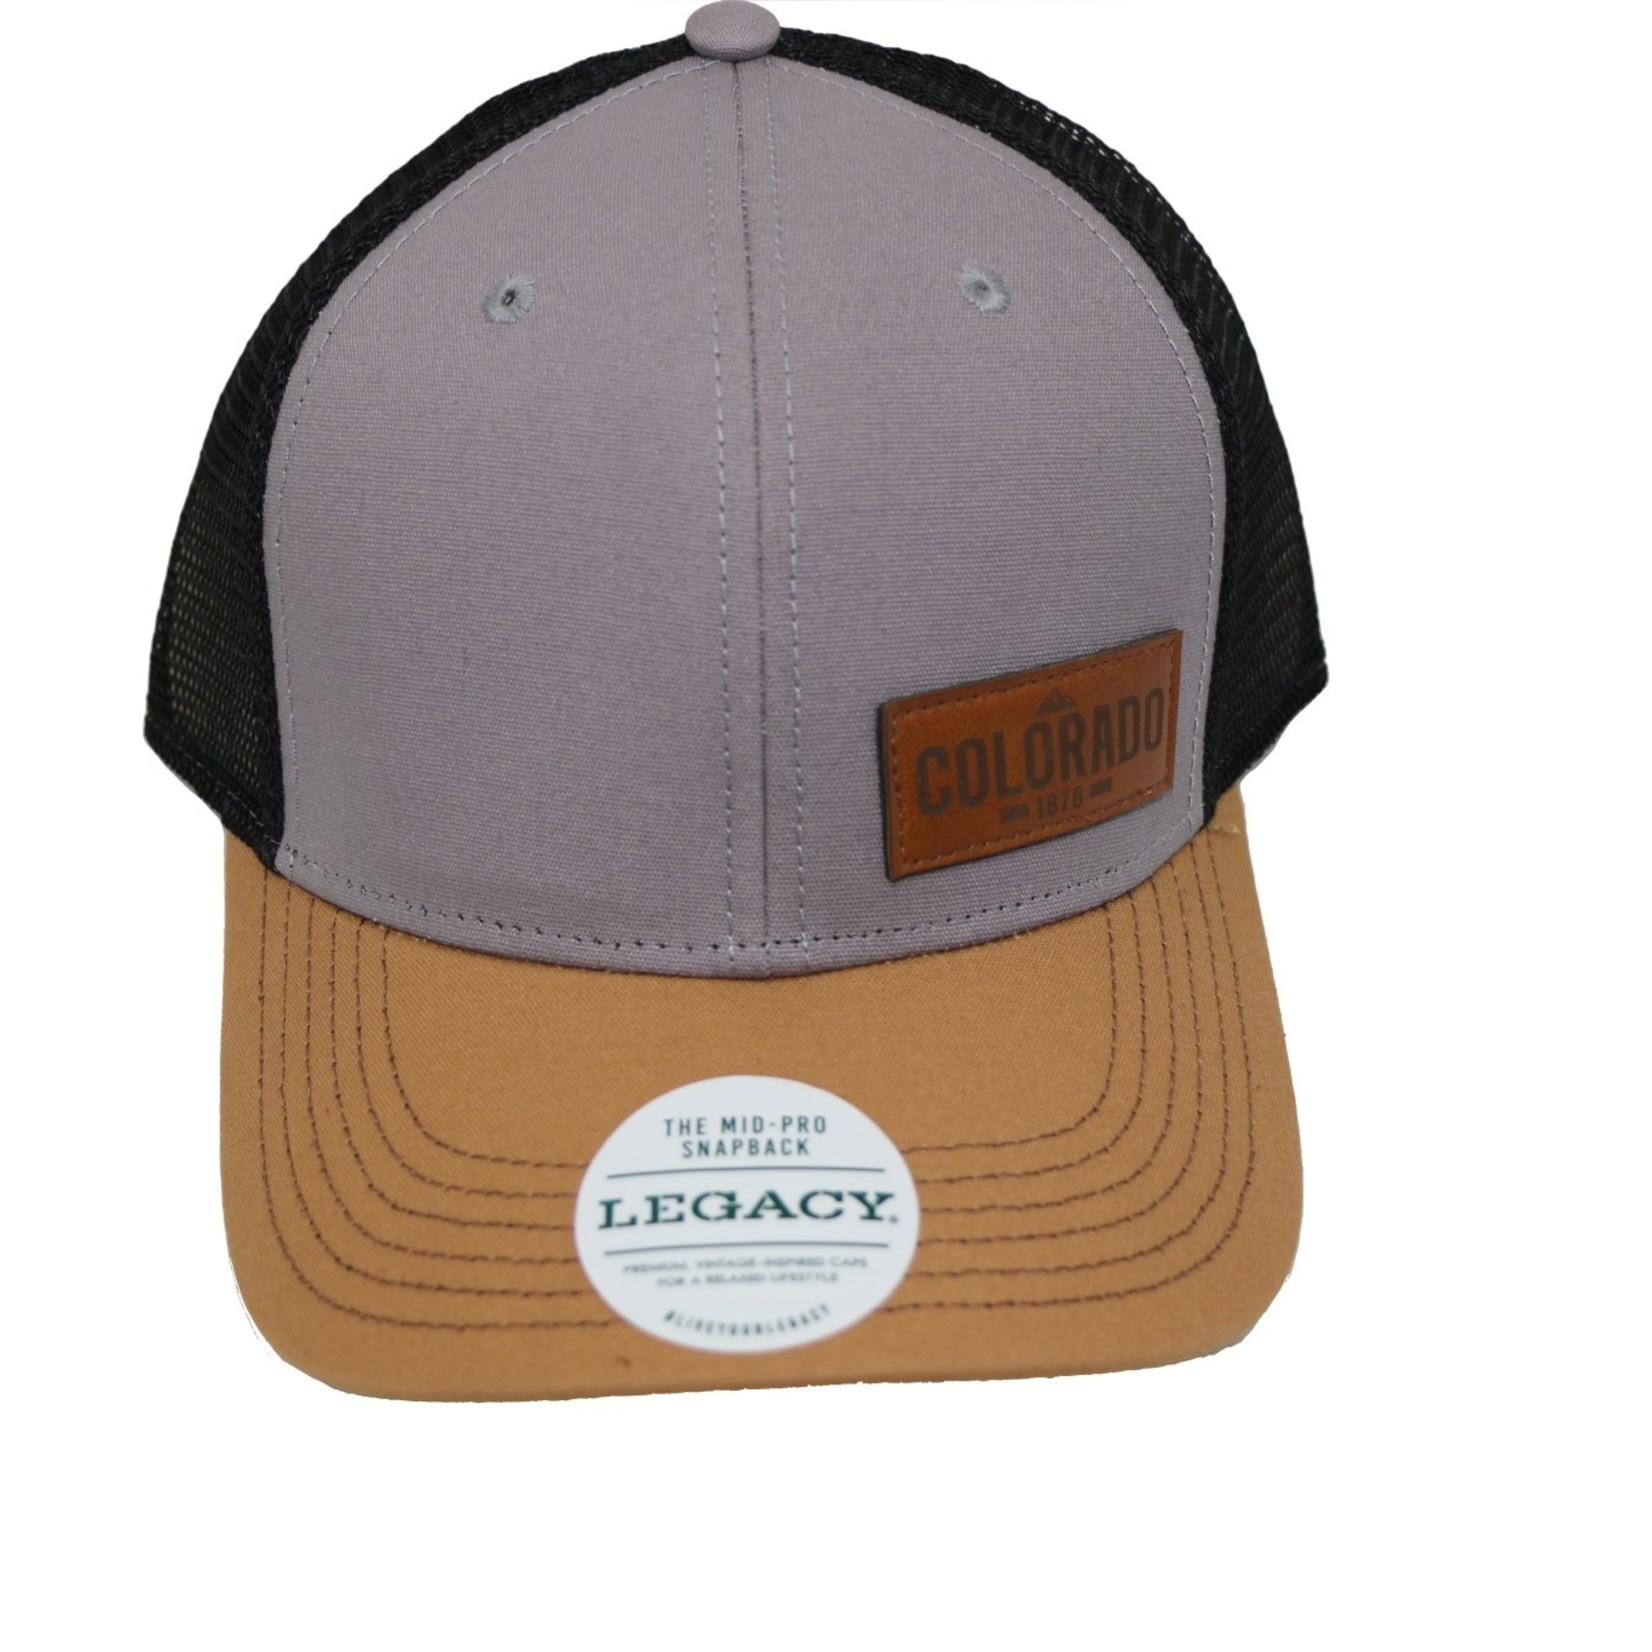 LEGACY Colorado Leather Patch Legacy Old Favorite Snapback Cap